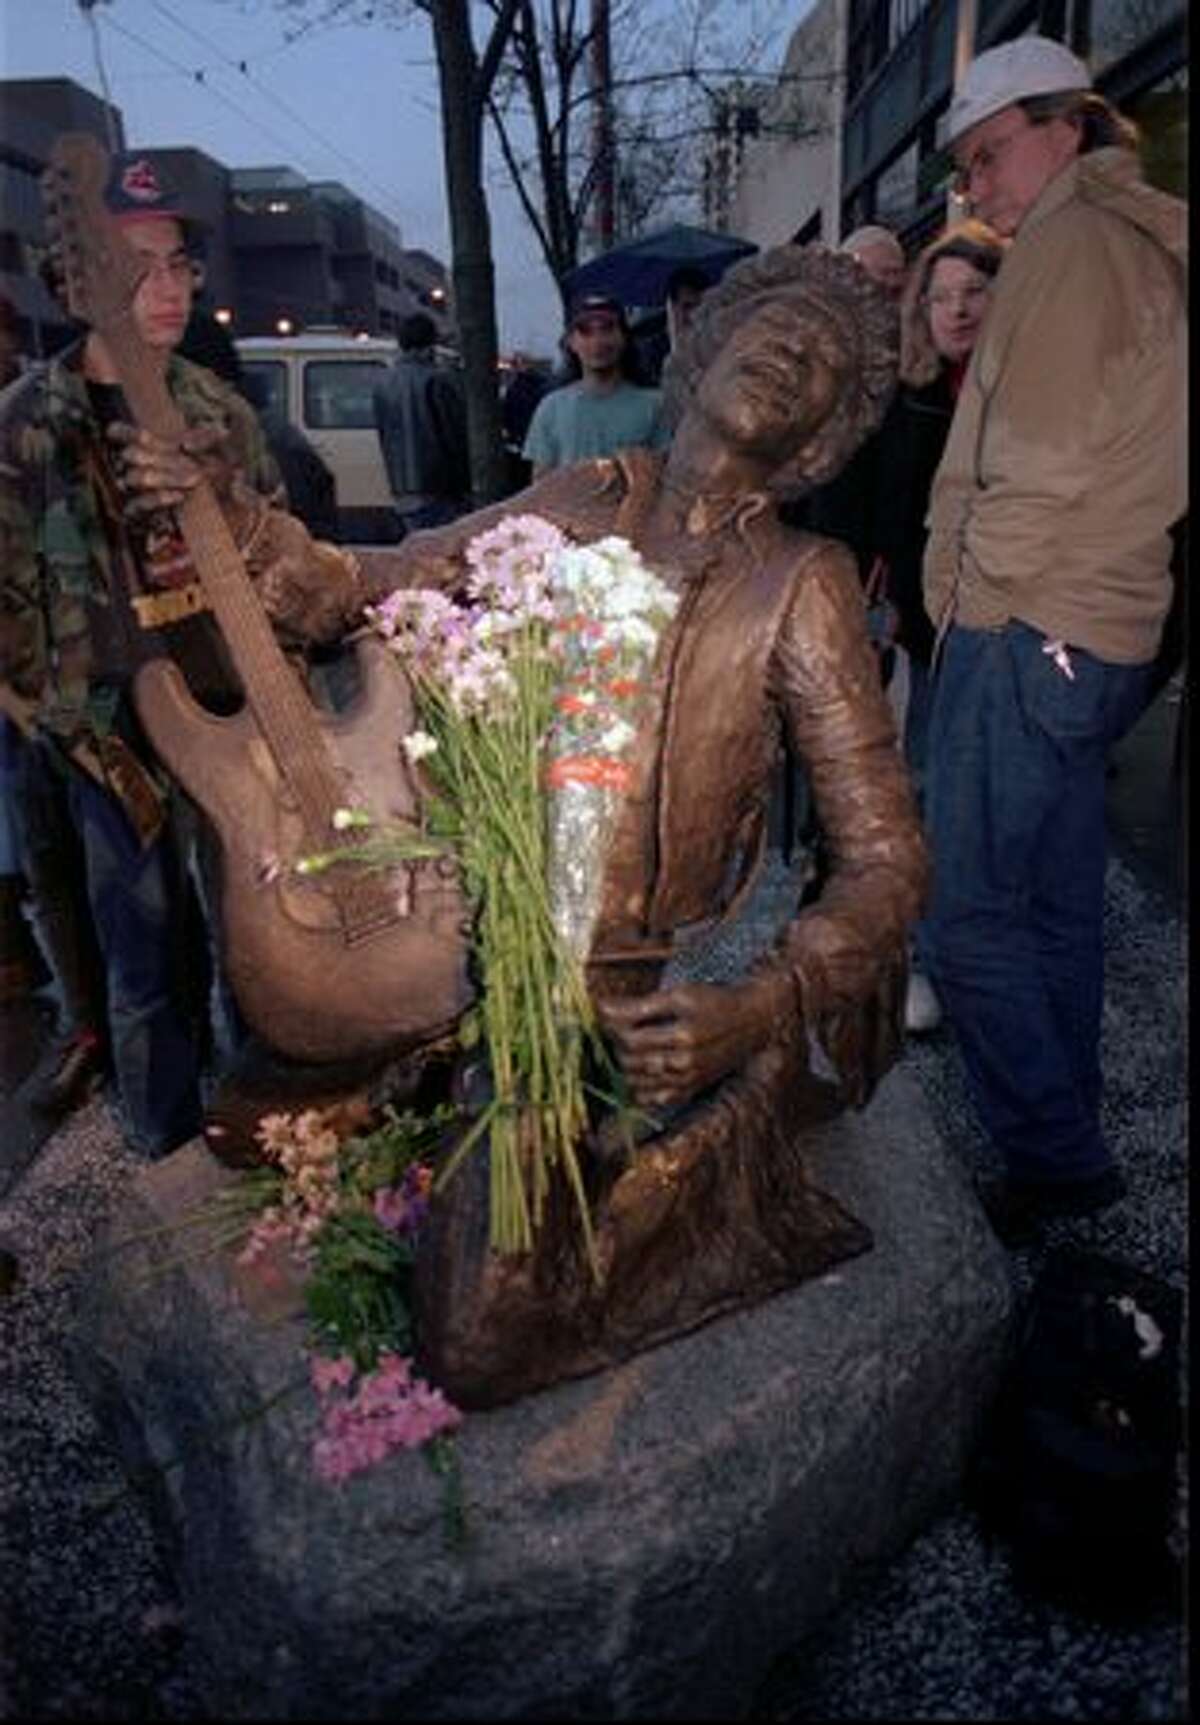 Fans view a bronze statue of the late guitarist Jimi Hendrix at an unveiling ceremony Tuesday, Jan. 21, 1997, outside the corporate offices of AEI Music in Seattle. AEI Music commissioned the statue to memorialize Hendrix's 1970 Fender Stratocaster guitar, which AEI owned, as part of their "Legends Collection" of music memorabilia. (AP Photo/Robert Sorbo)